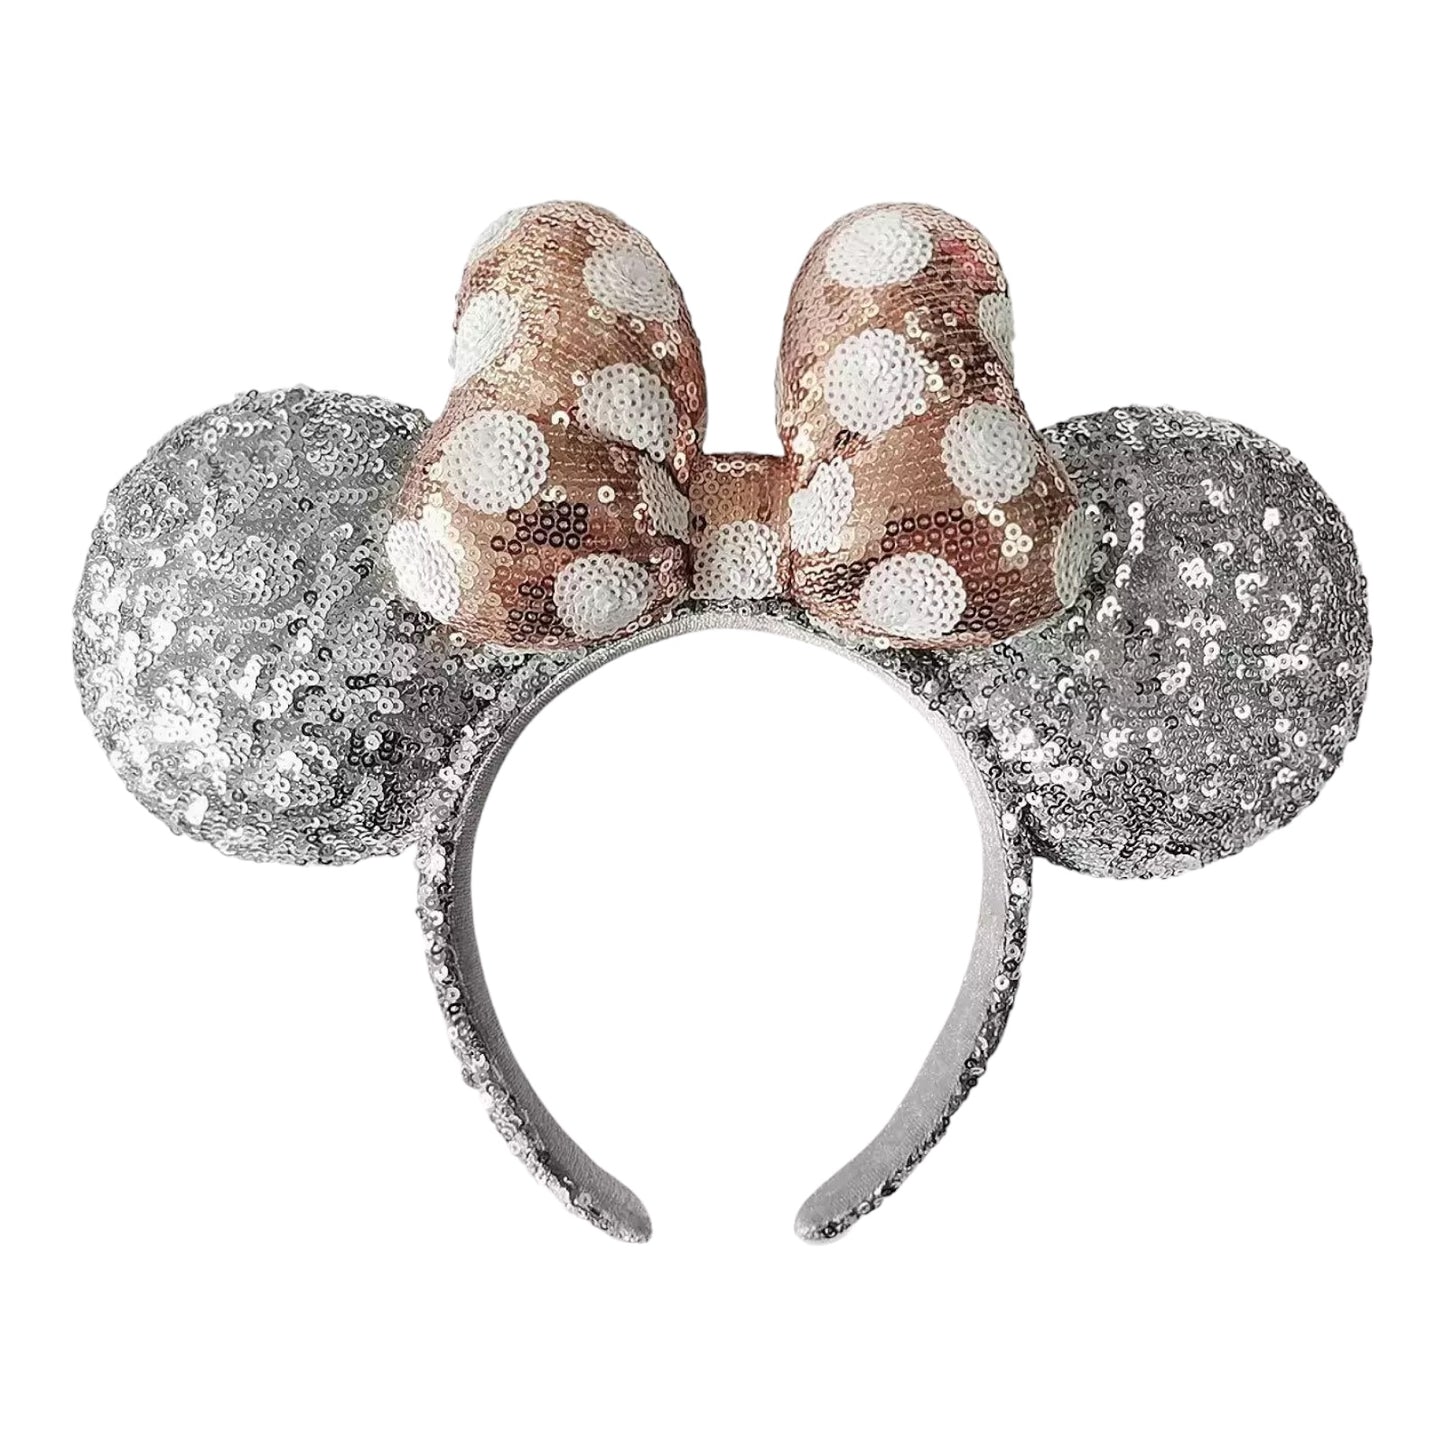 Minnie Mouse Silver Sequined Ear Headband with Rose Gold Bow